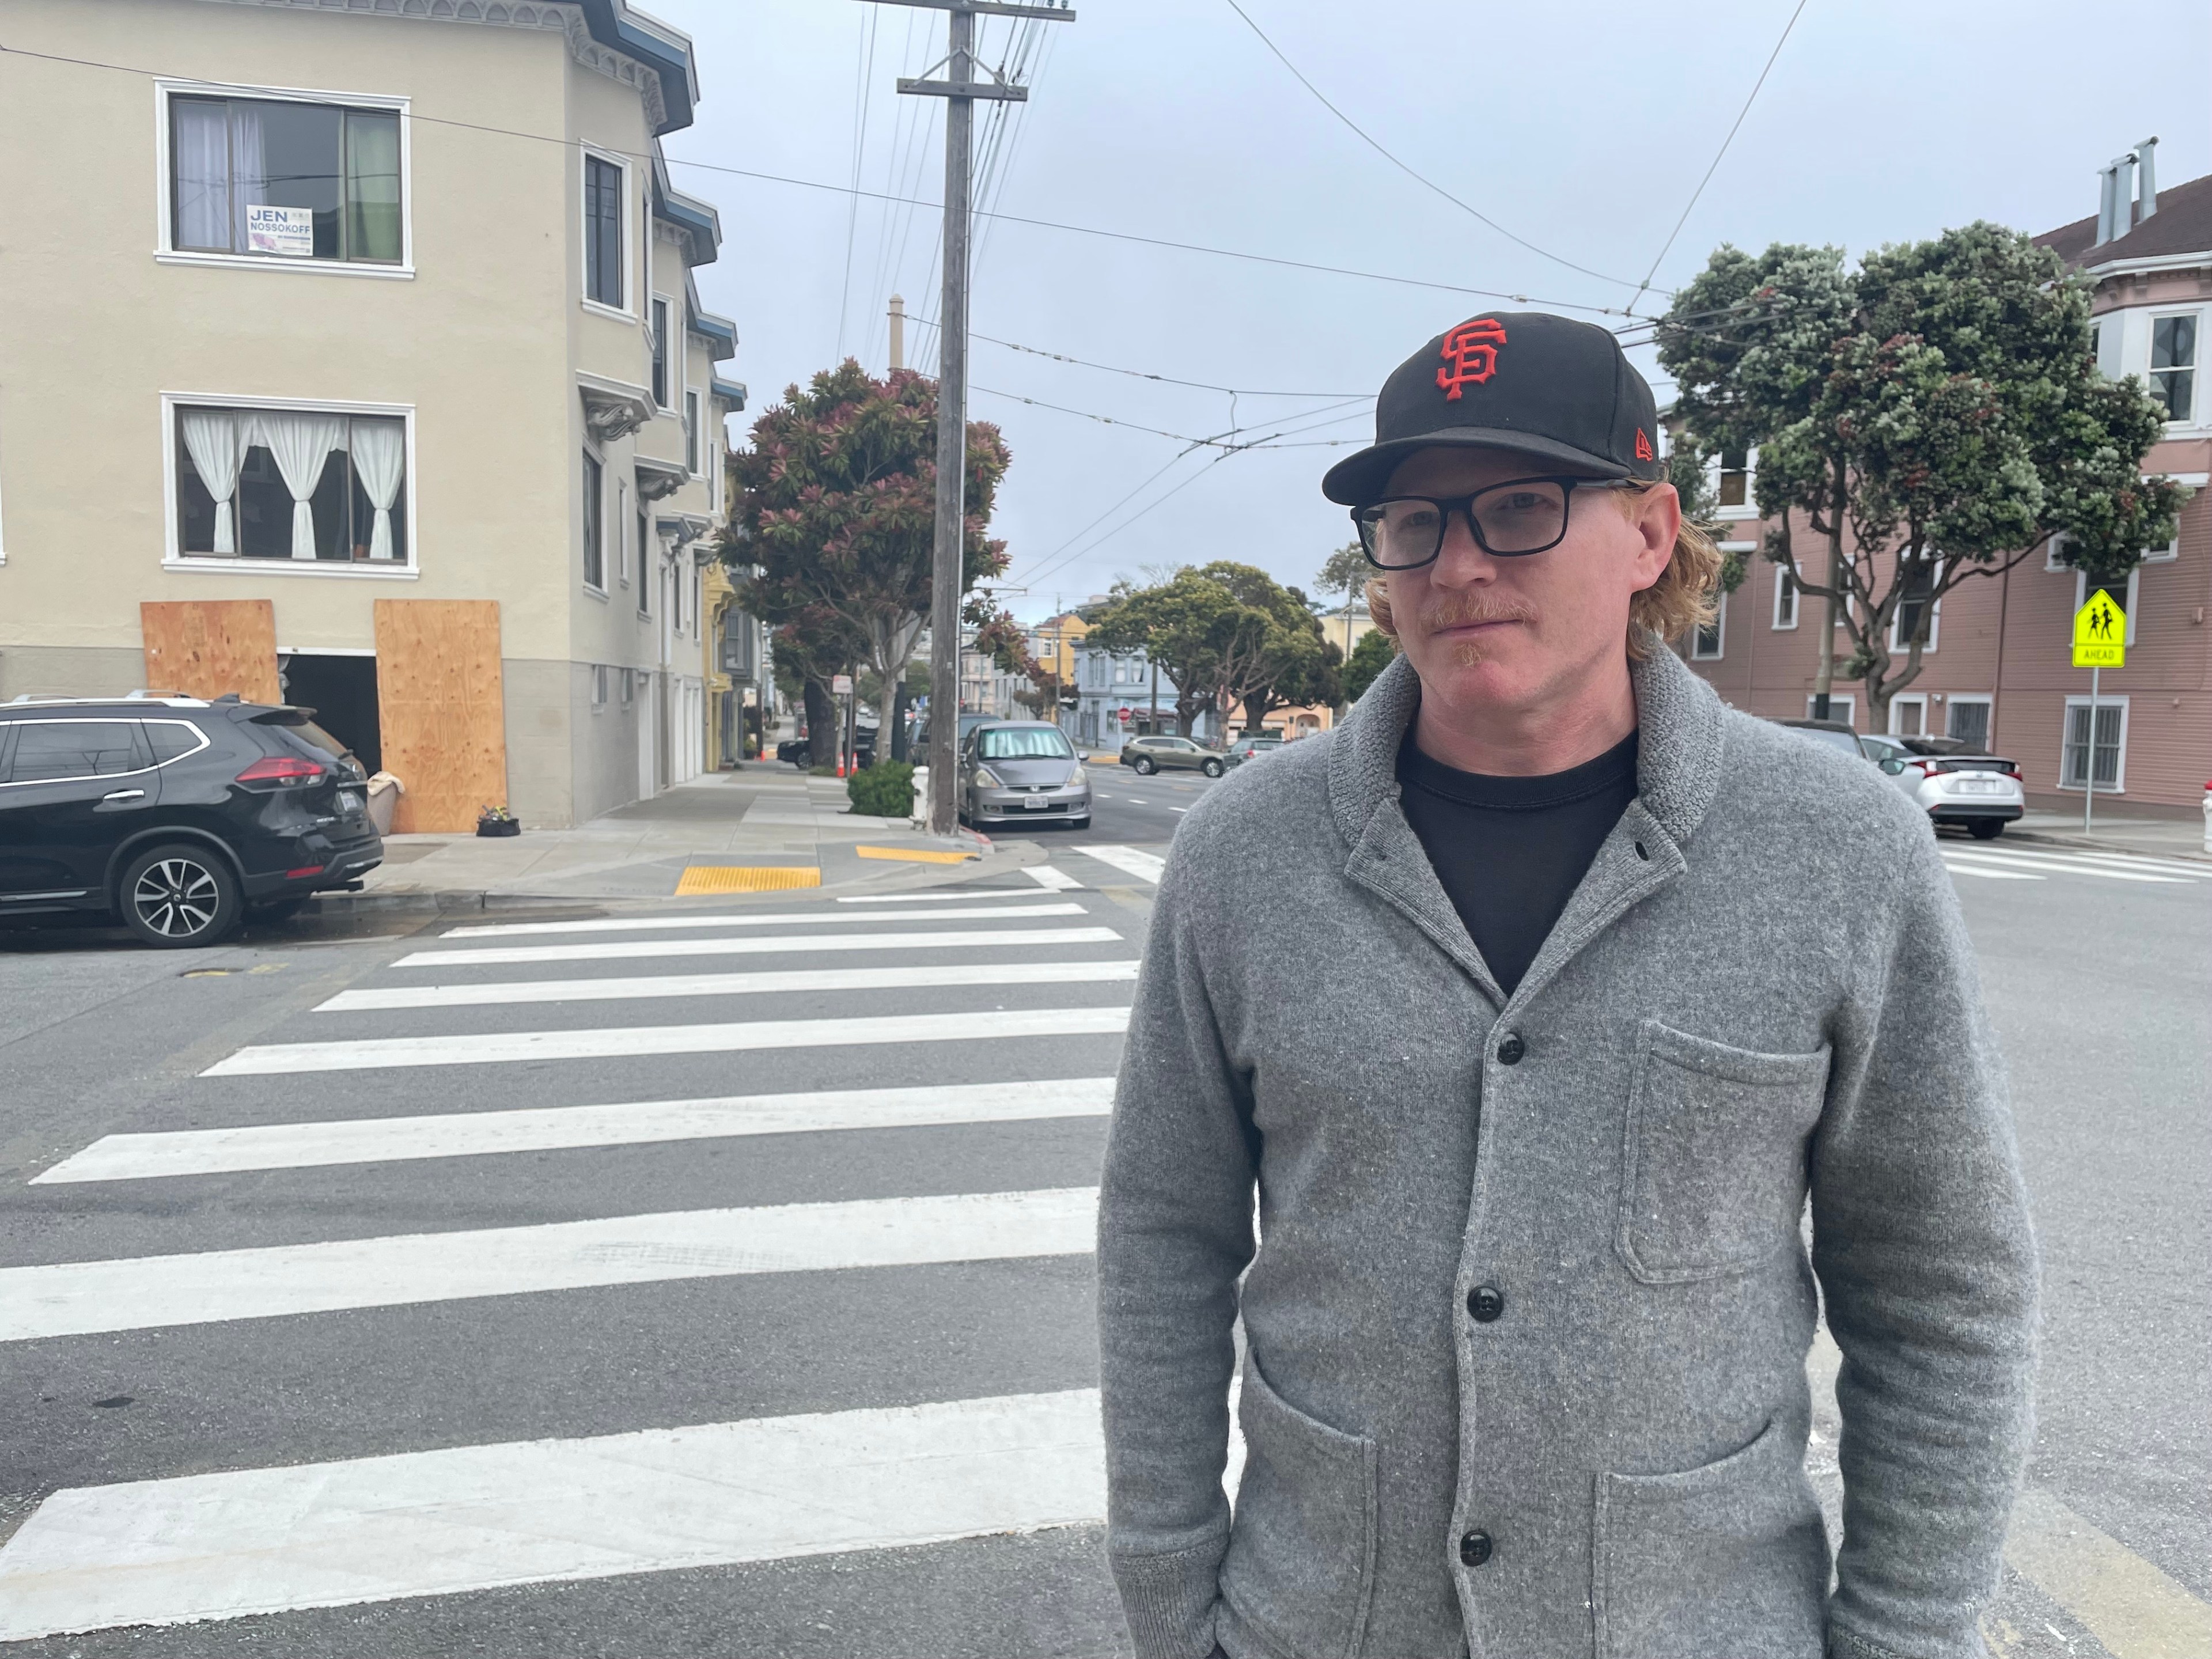 A man stands before a crosswalk on a city street, wearing a grey coat and a baseball cap with the SF Giants logo. The neighborhood has residential buildings and parked cars.